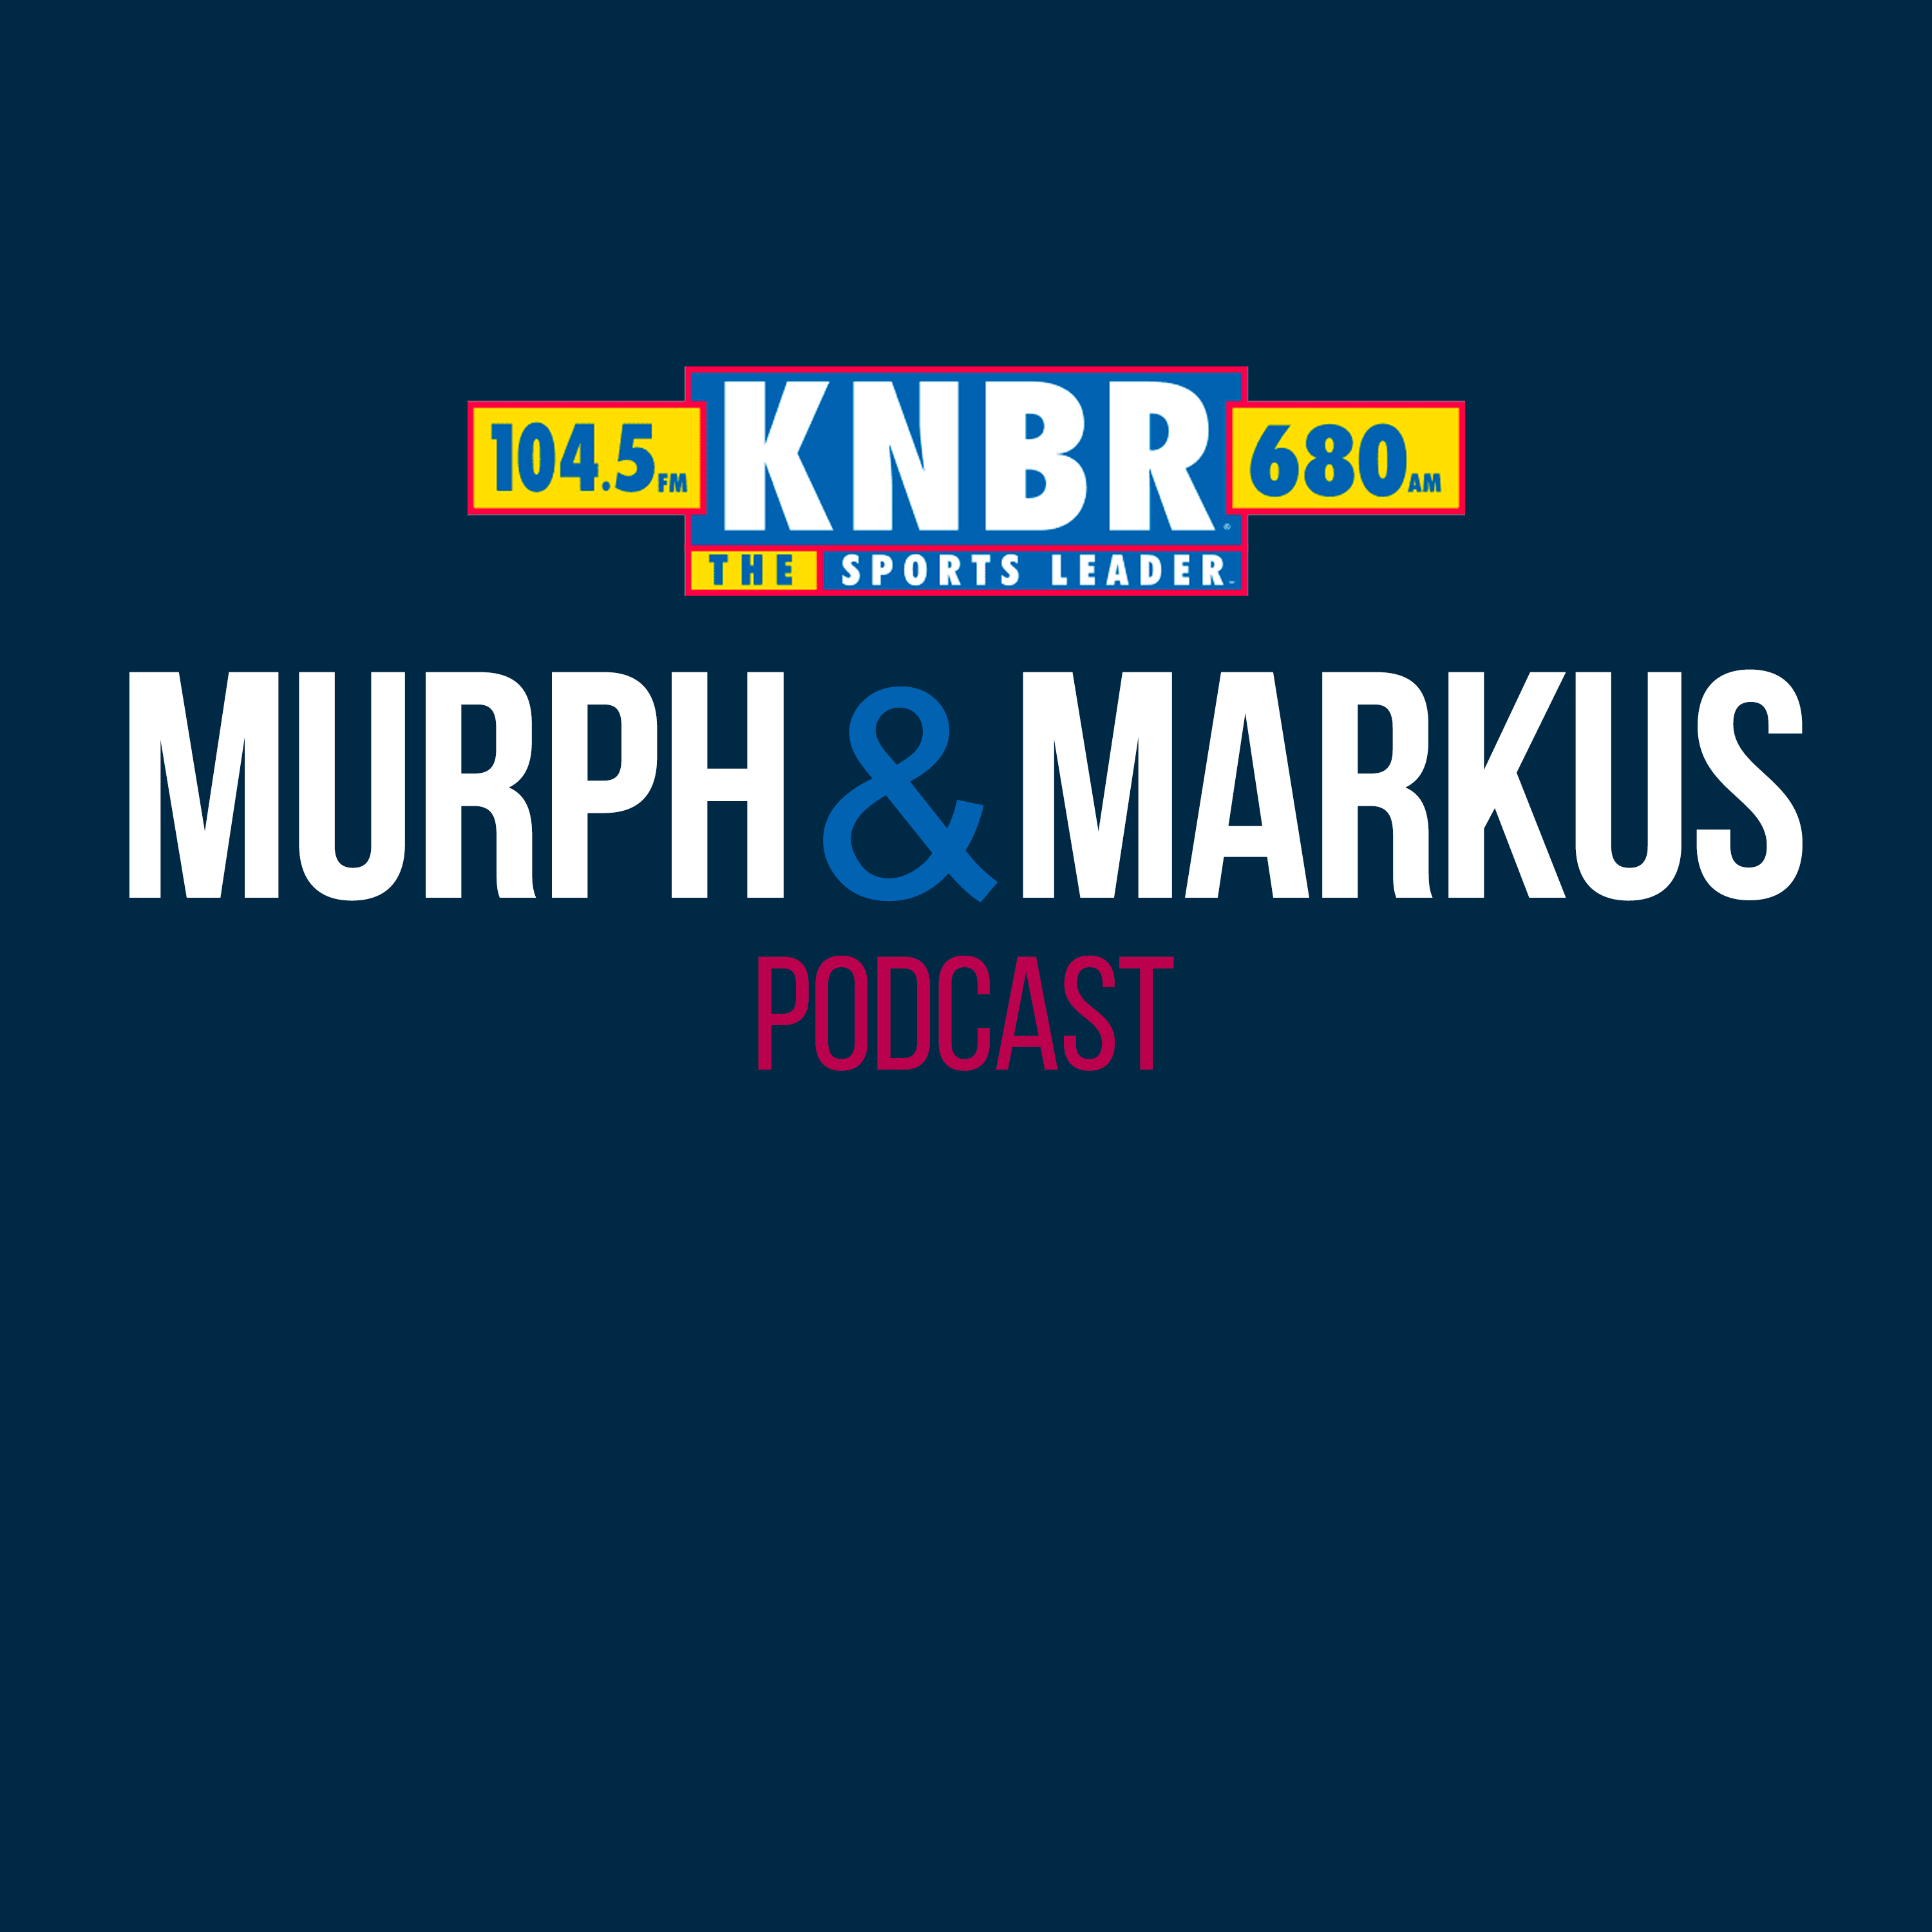 6-17 Hour 1: Murph & Markus share their thoughts on the Giants losing two out of three games vs the Angels, react to Klay Thompson unfollowing the Warriors on Instagram, and recap the weekend in sports with Humms & Bums